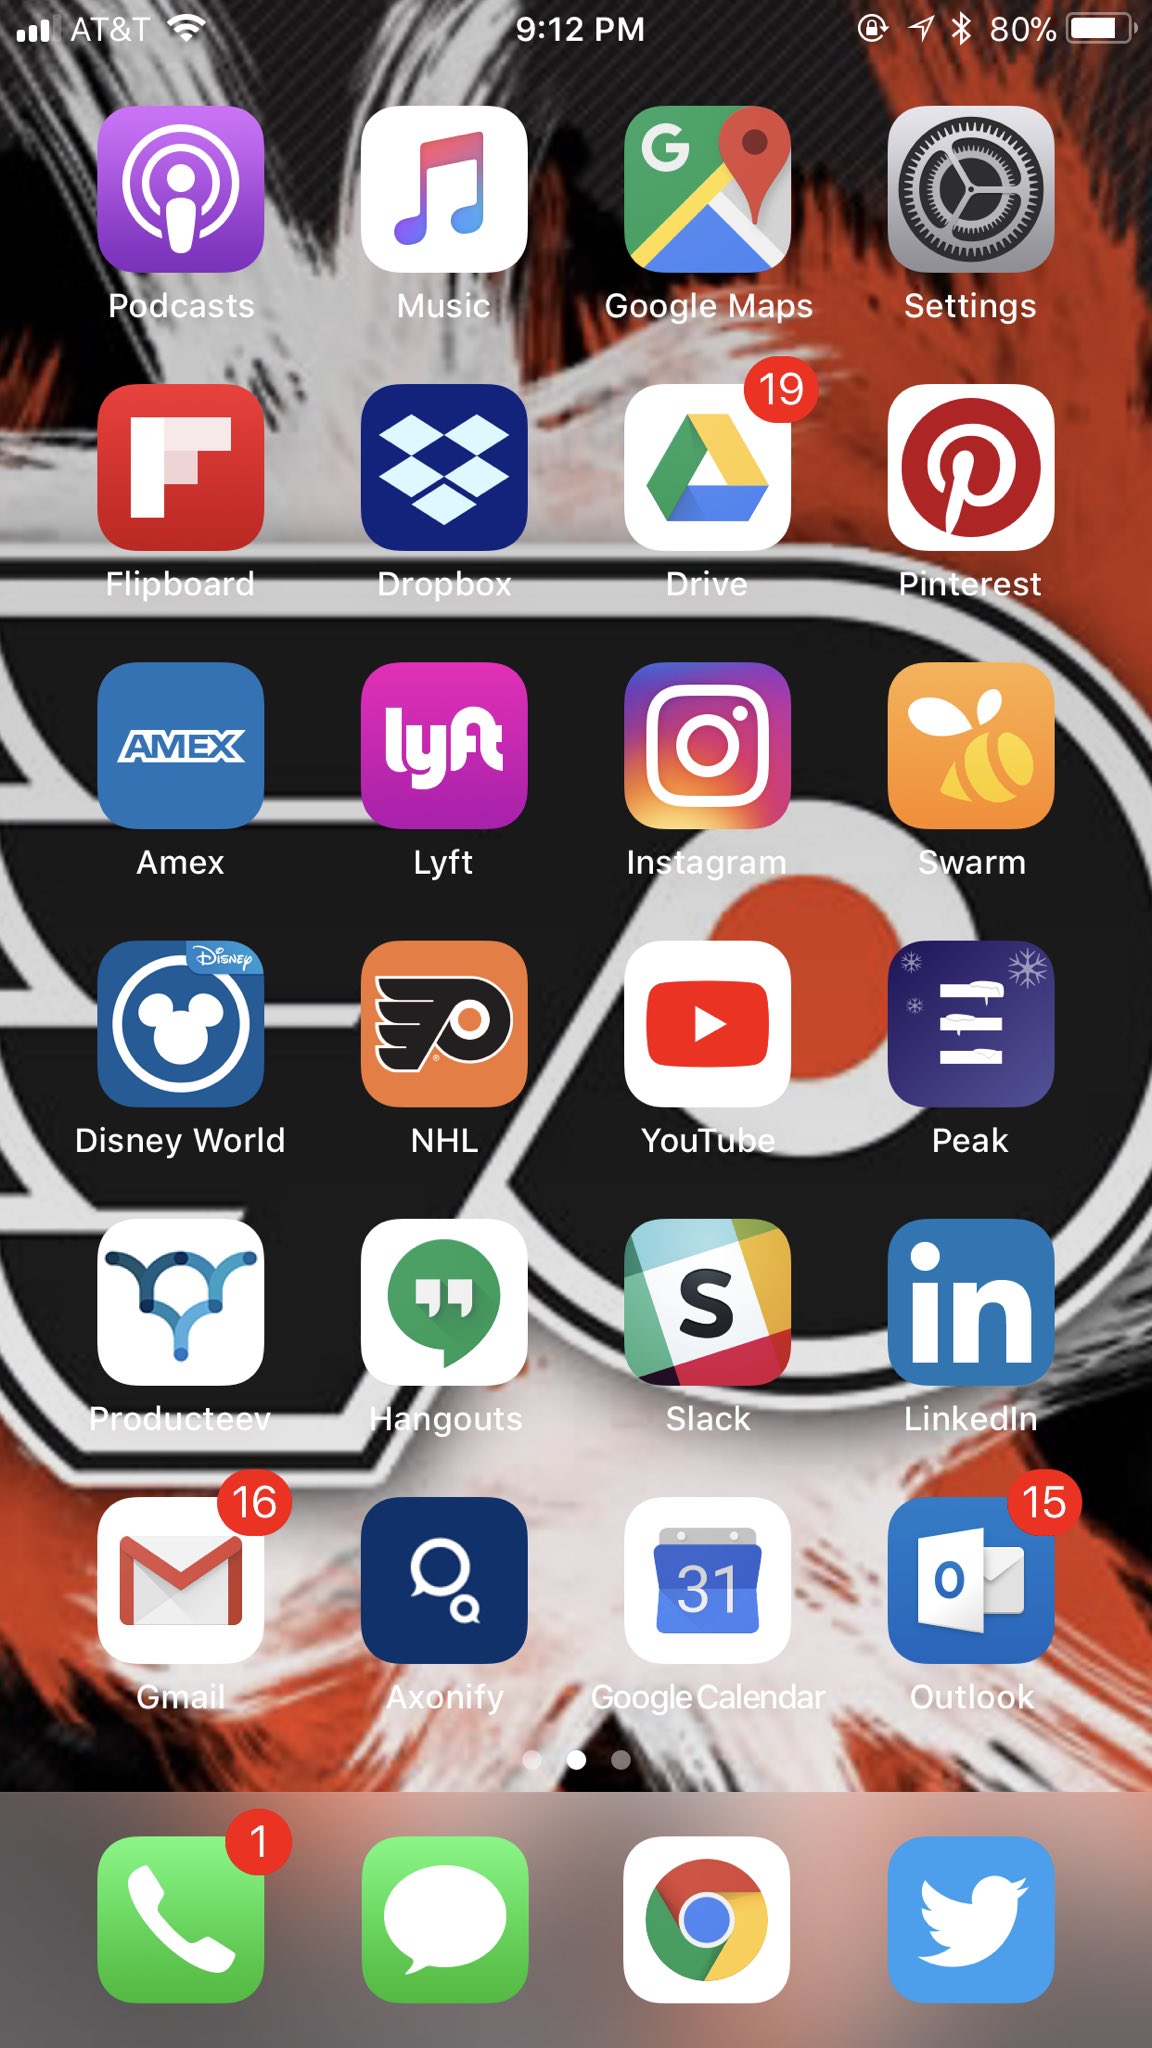 My first screen - daily (almost) use apps #lrnchat https://t.co/rzfHxYwXsi